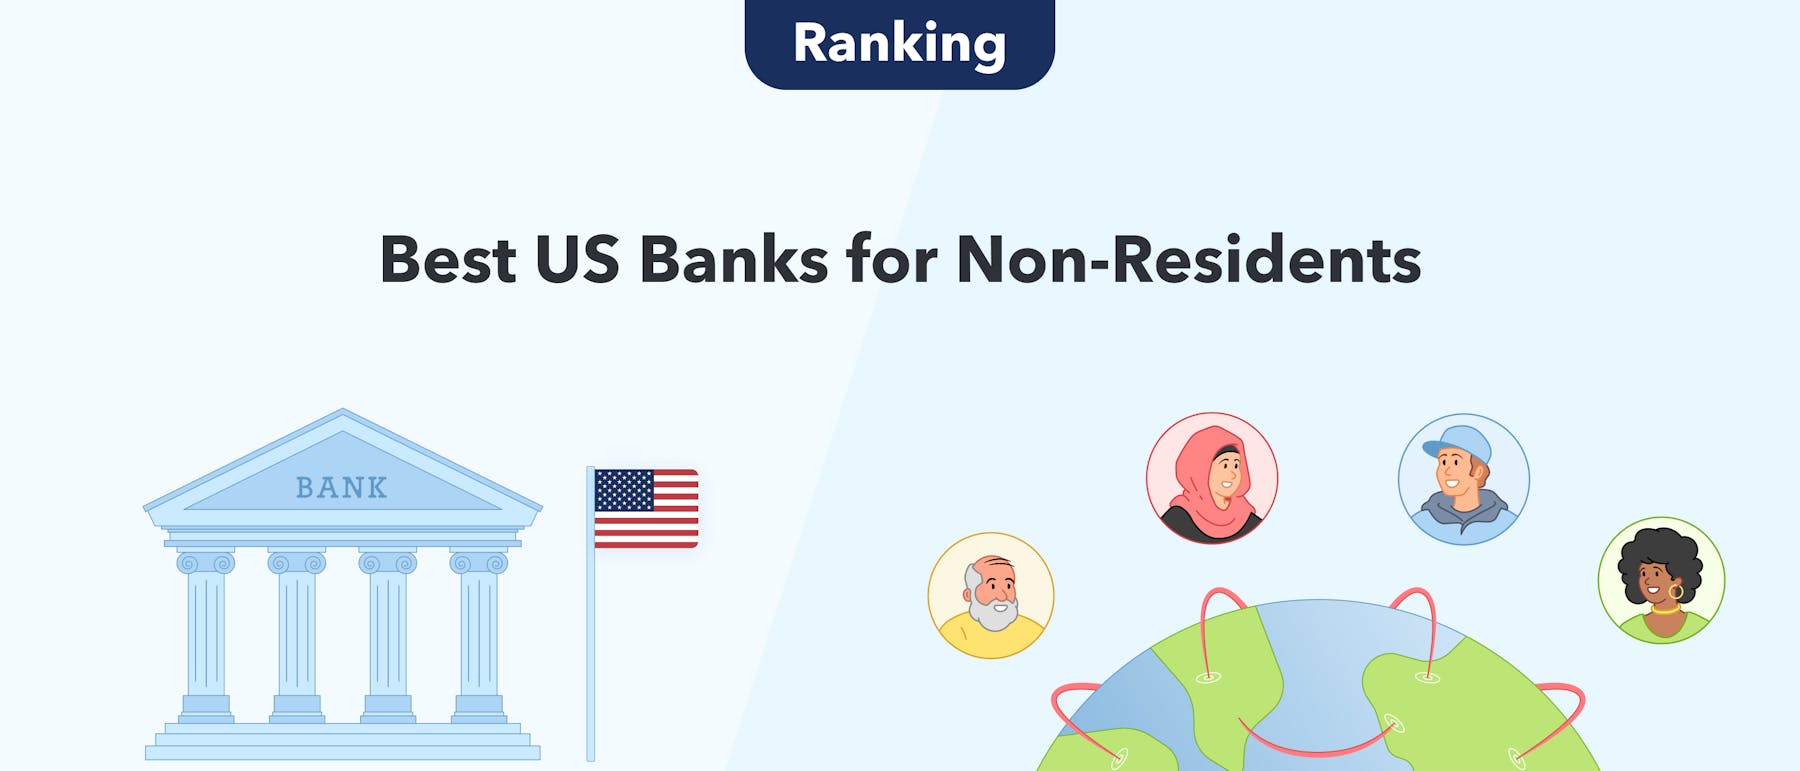 6 Best Us Banks For Non-Residents And Foreigners